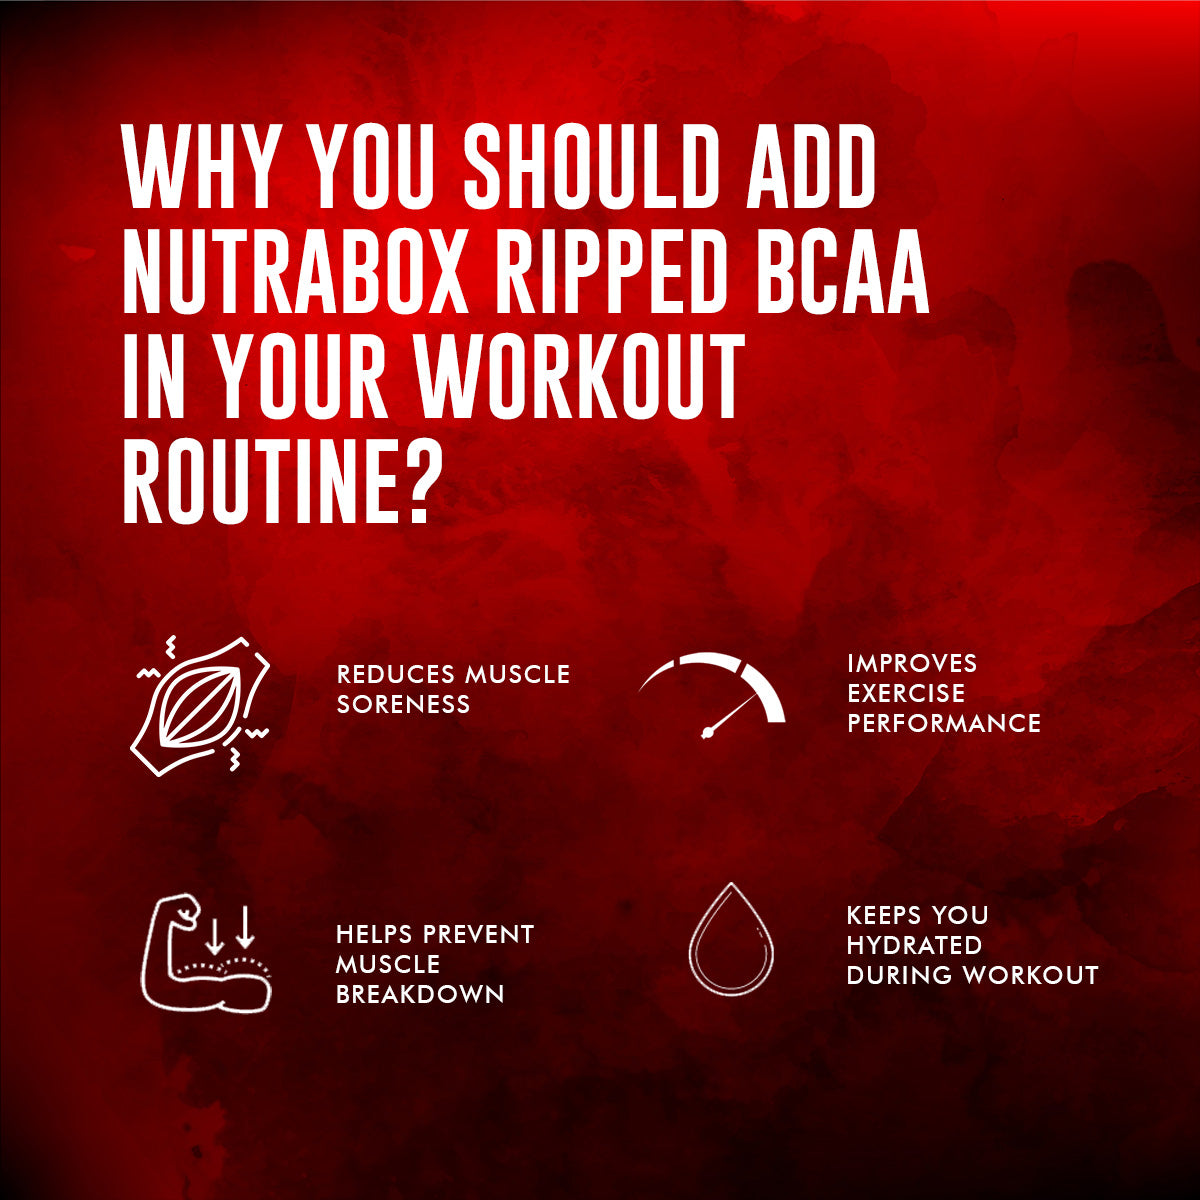 Why you should add Nutrabox Ripped BCAA in your workout routine?